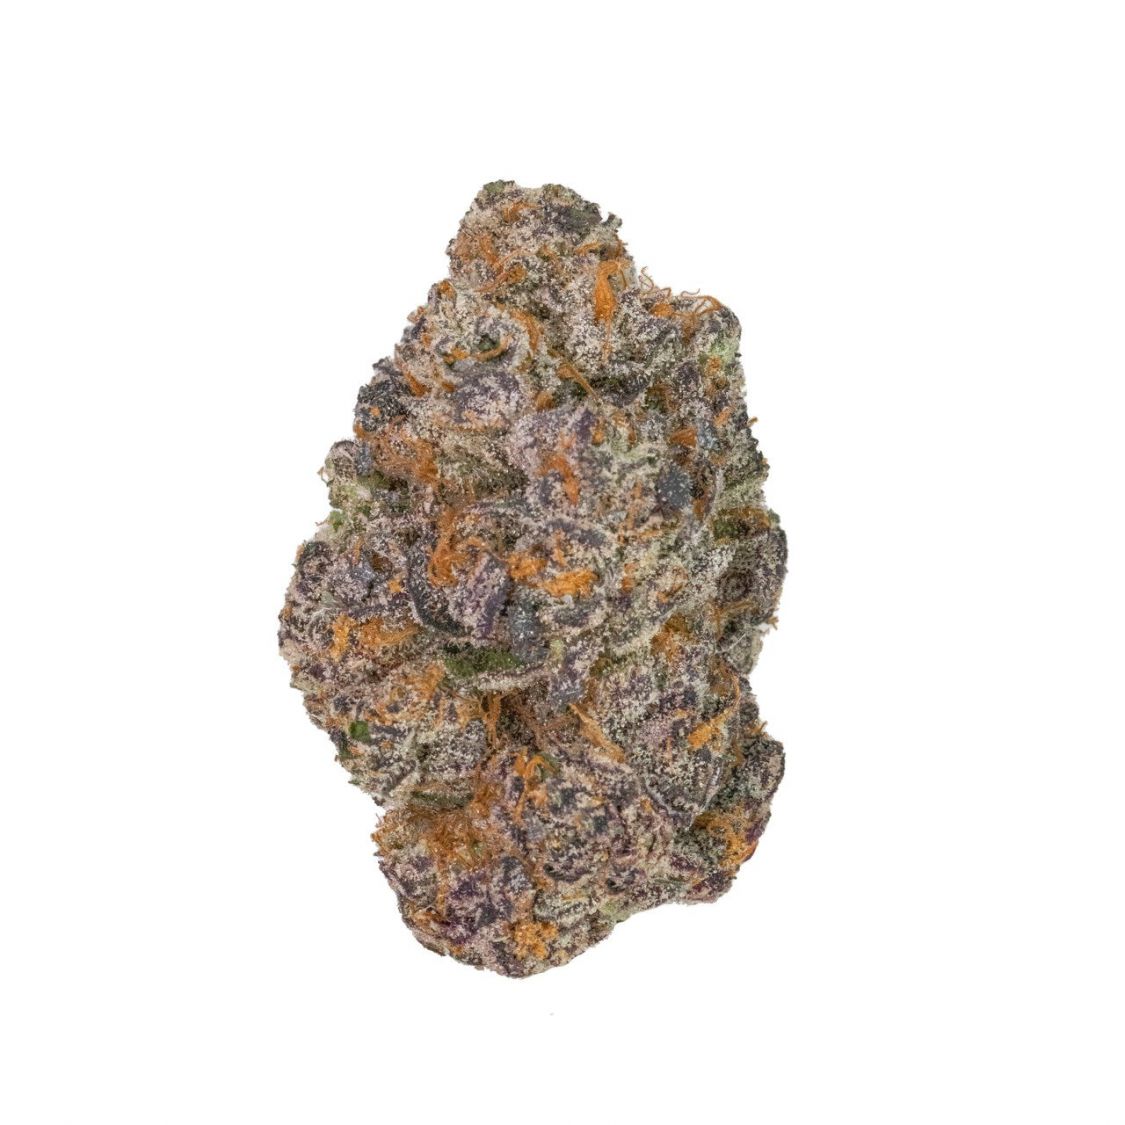 TASTY!! LIL APPLE FRITTER - BLOWOUT SALE TOP SHELF Flower Indica